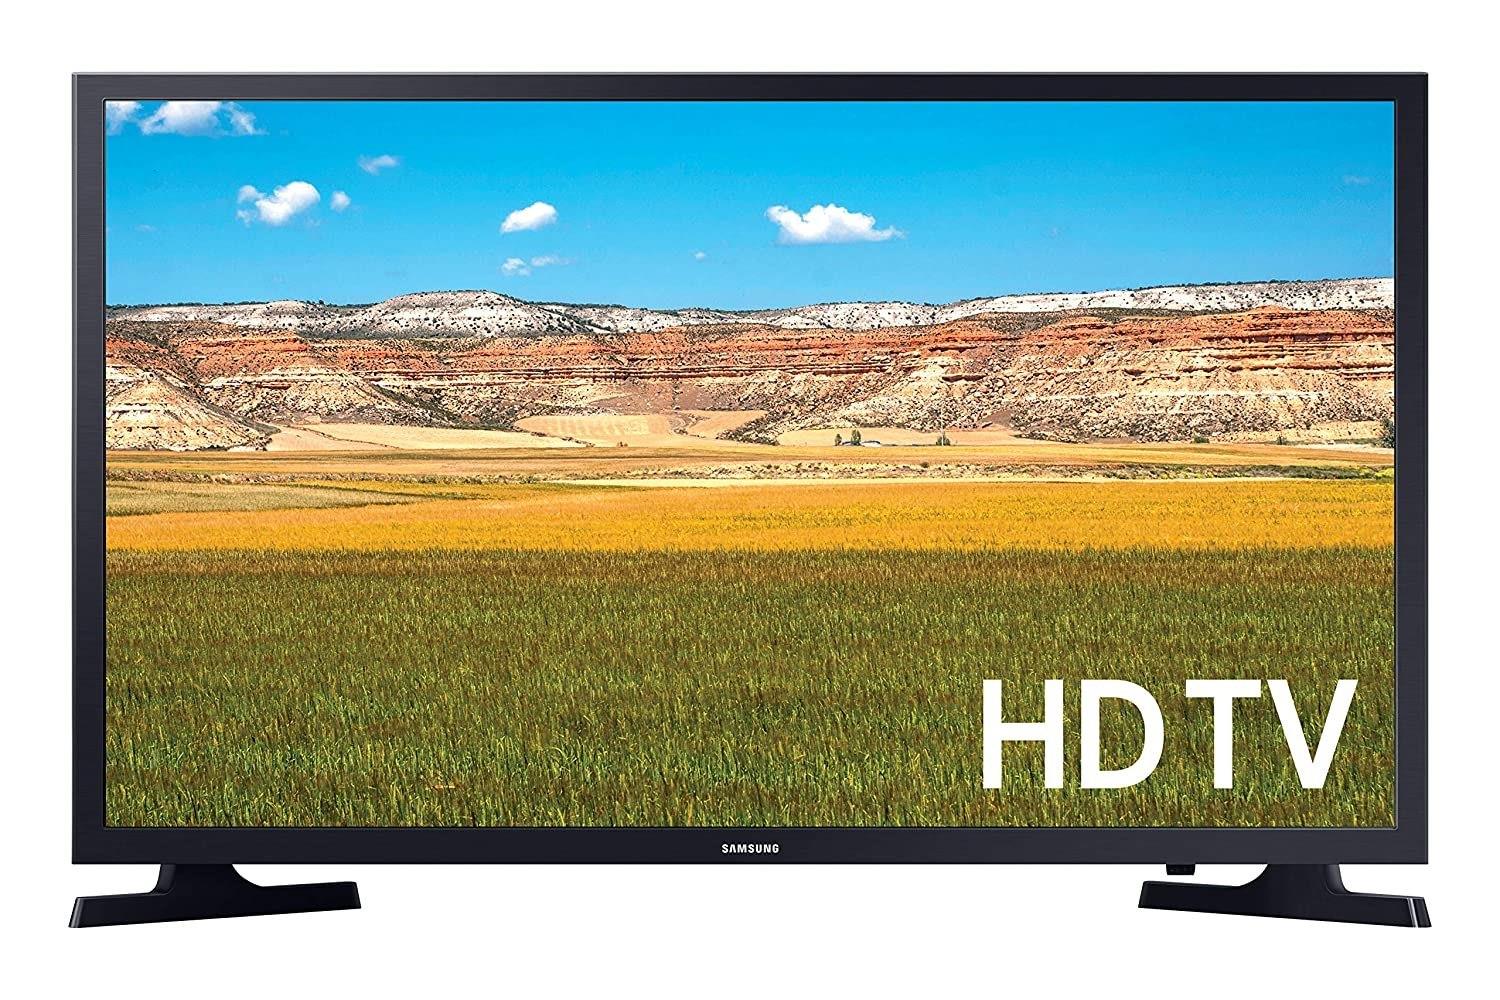 What You Need To See High Definition On An HDTV